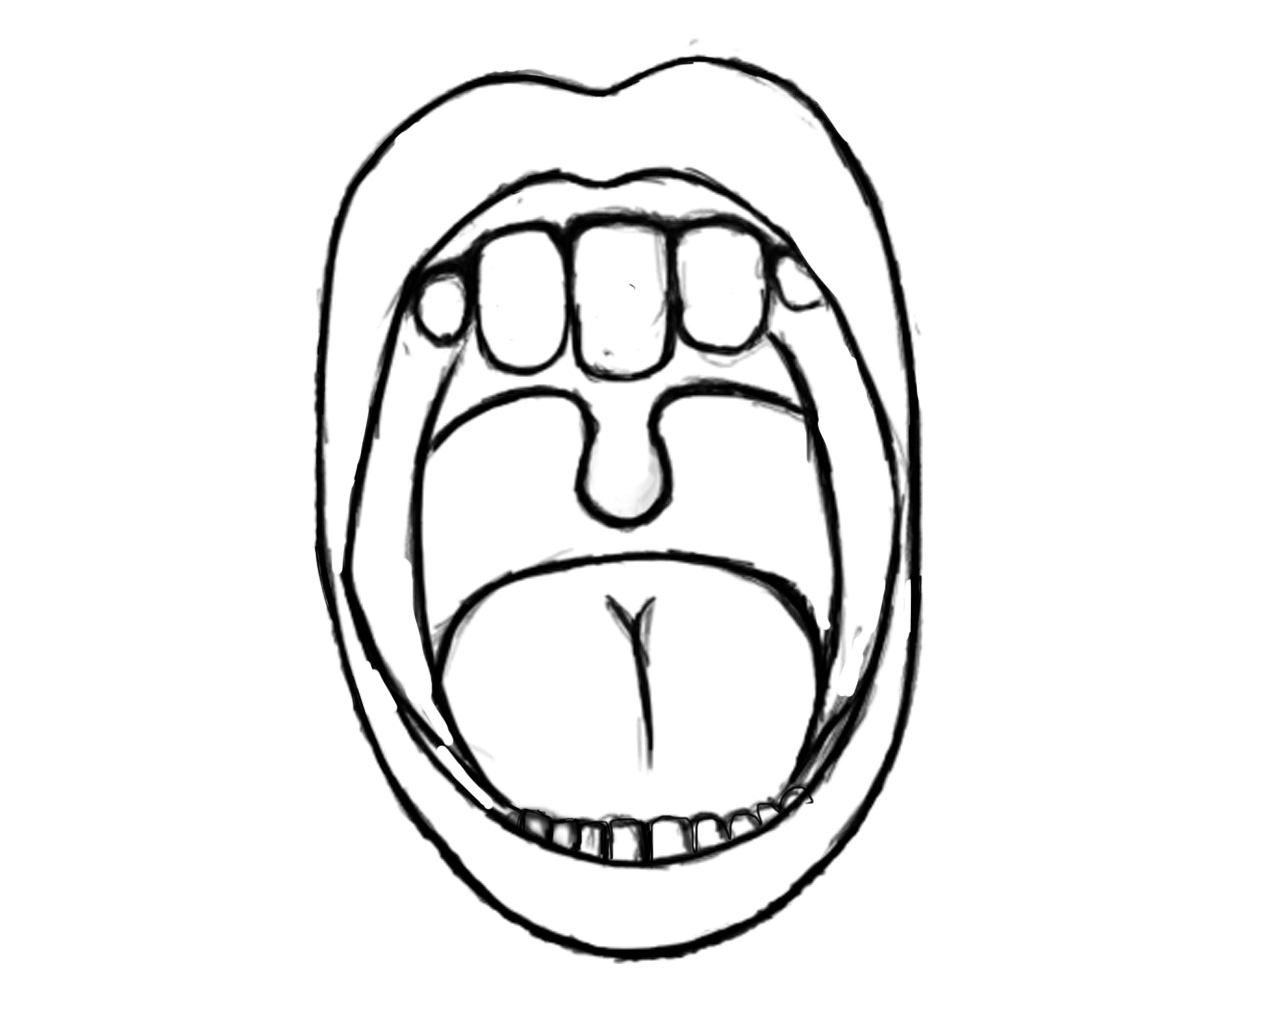 Lips Coloring Page. Mouth With Teeth Coloring Page The Mouth ...